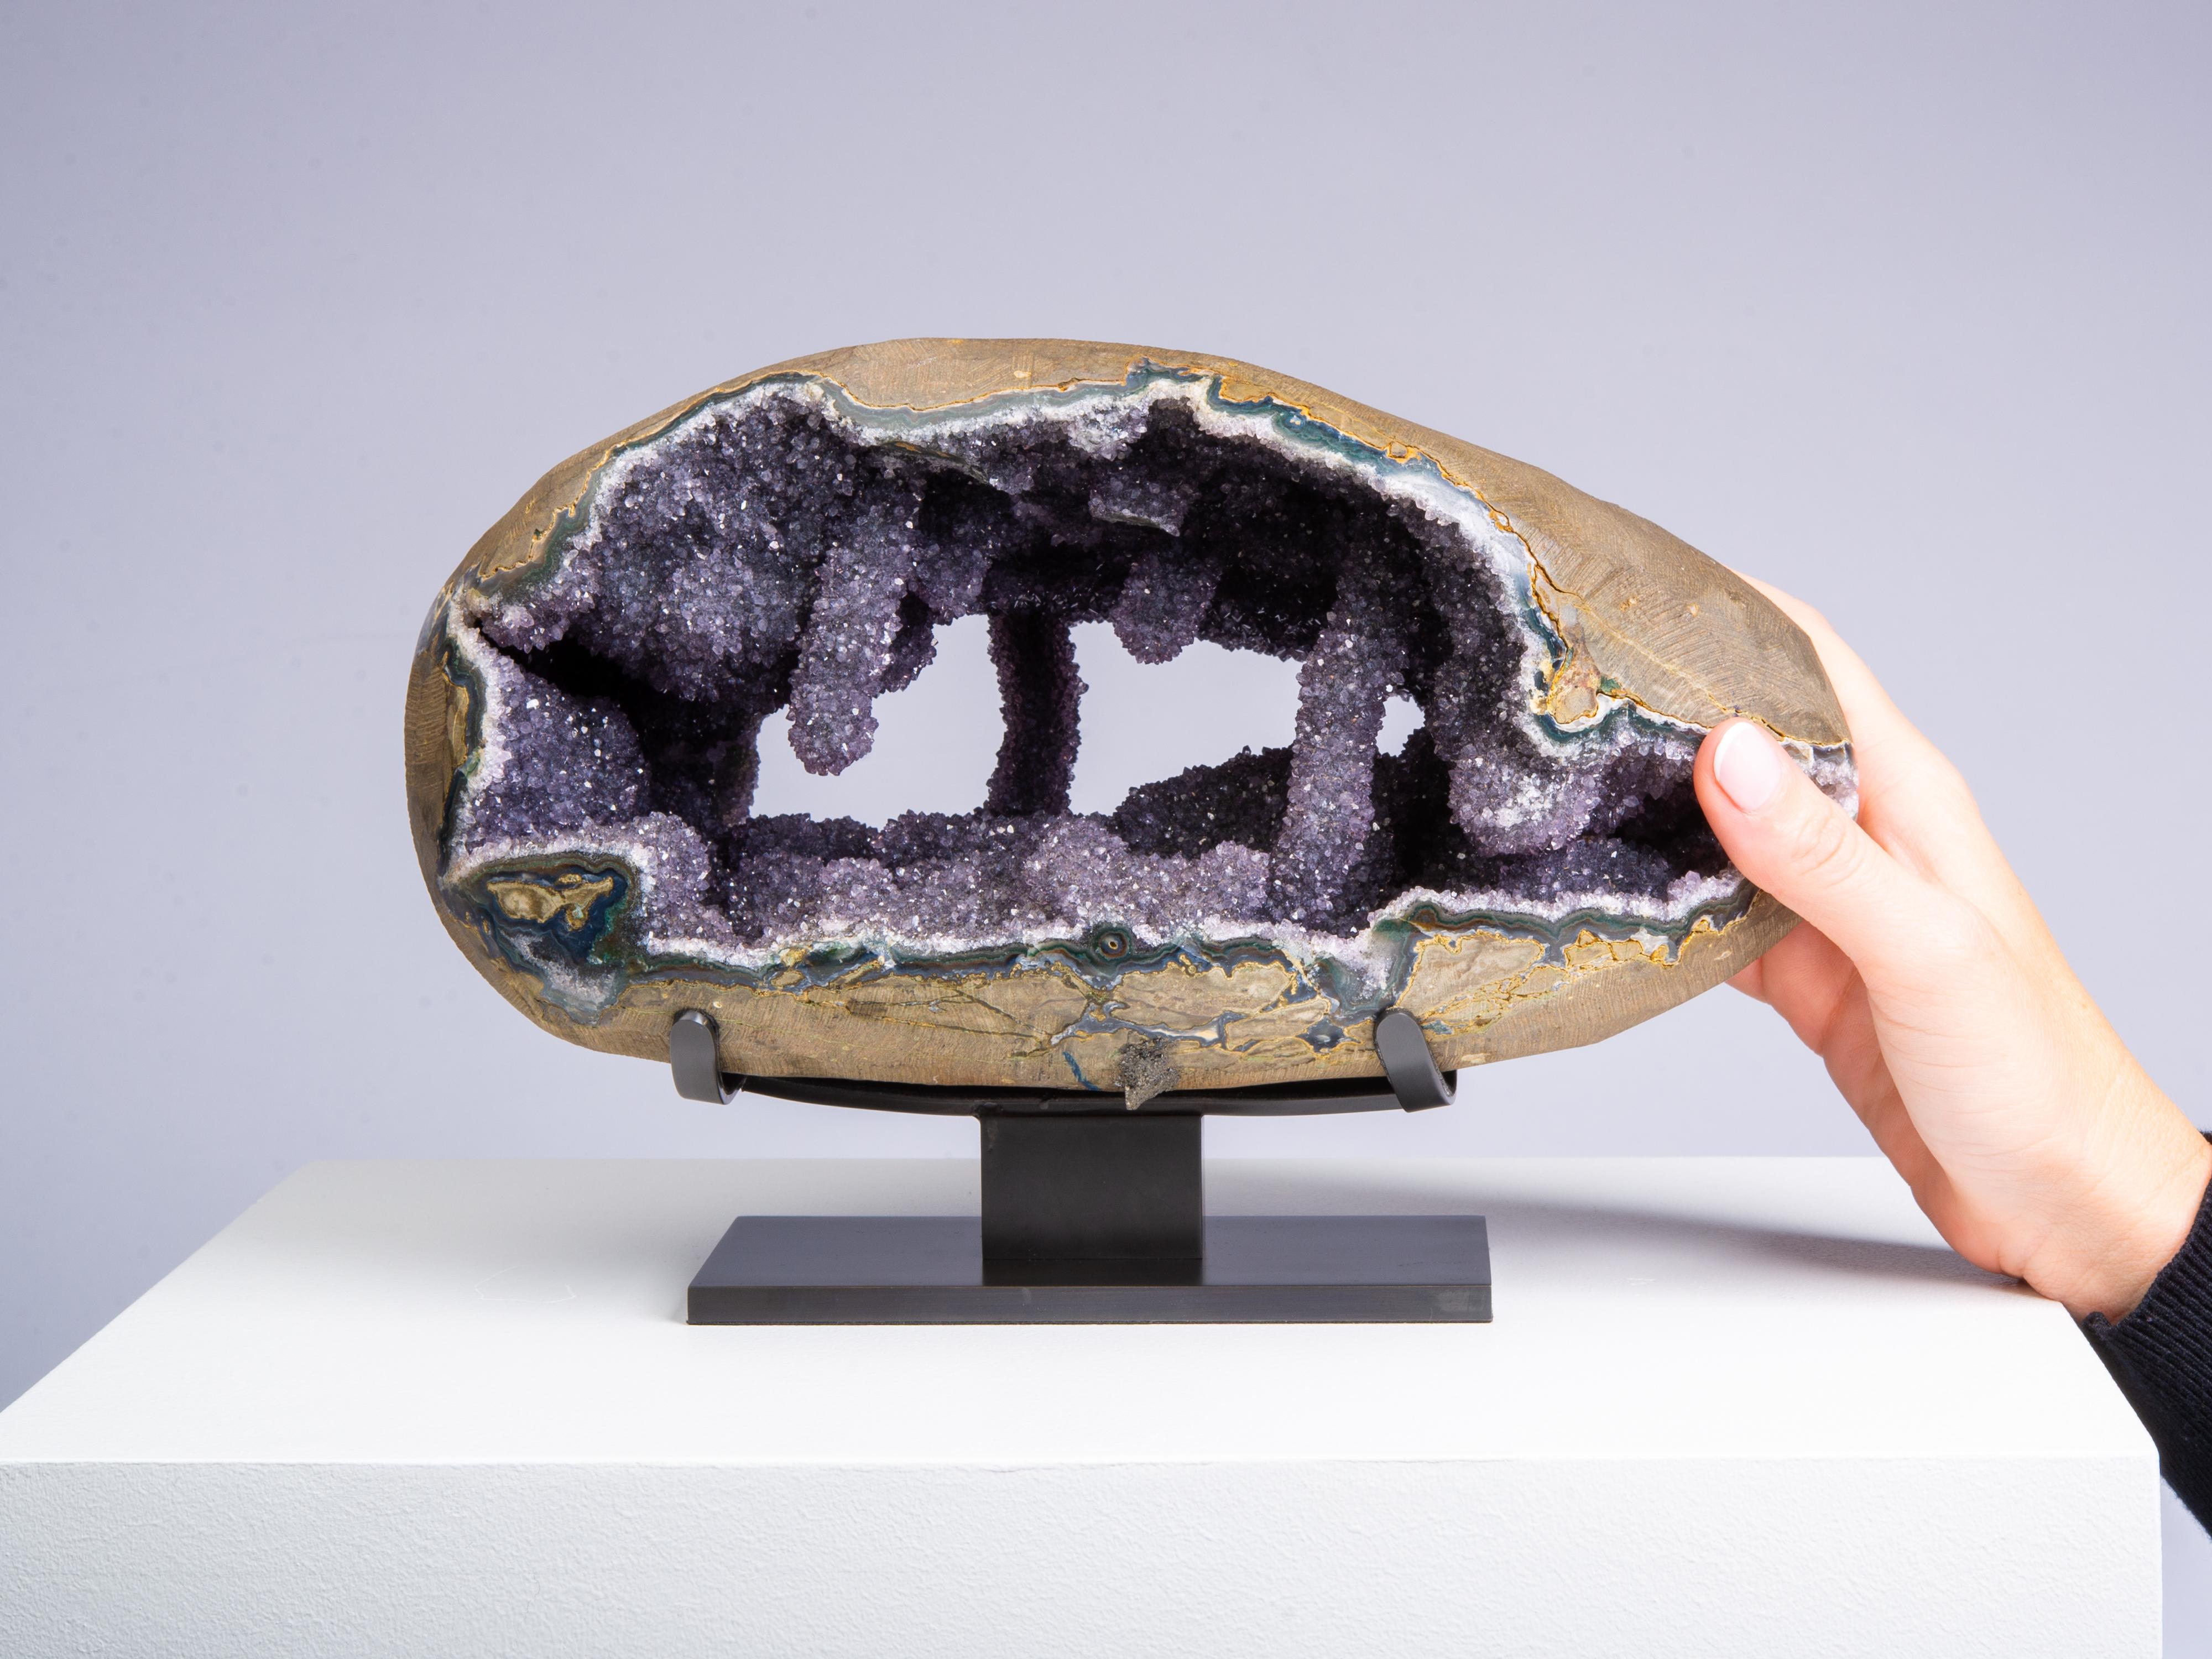 18th Century and Earlier Amazing Geode with Stalactites and Stalagmites with Amethyst and Grey Druze